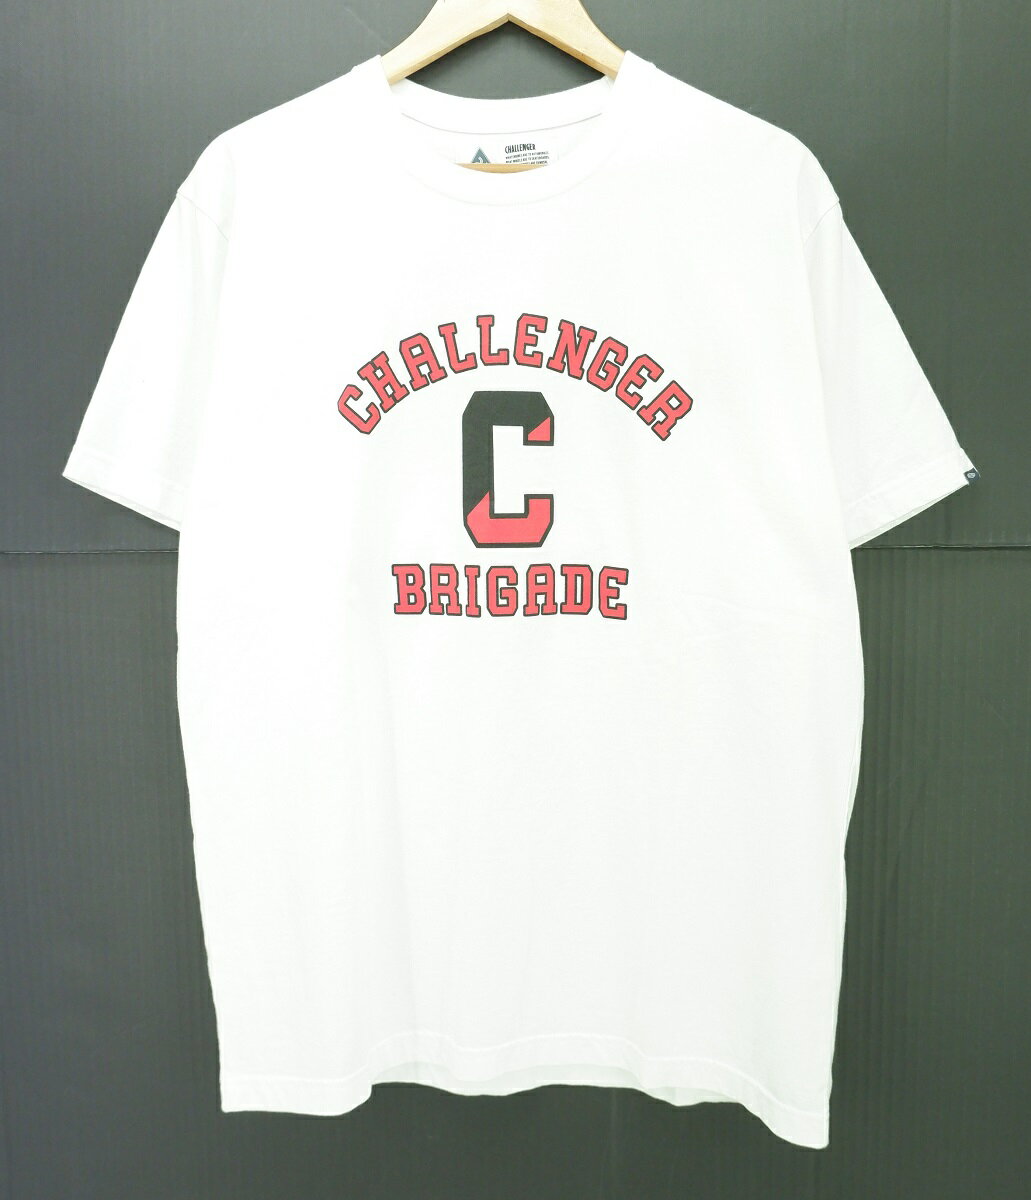 CHALLENGER 23SS S/S COLLEGE Tee size：XL チャレンジャー プリント 半袖Tシャツ ホワイト CLG-TS 023-002 Made in Japan